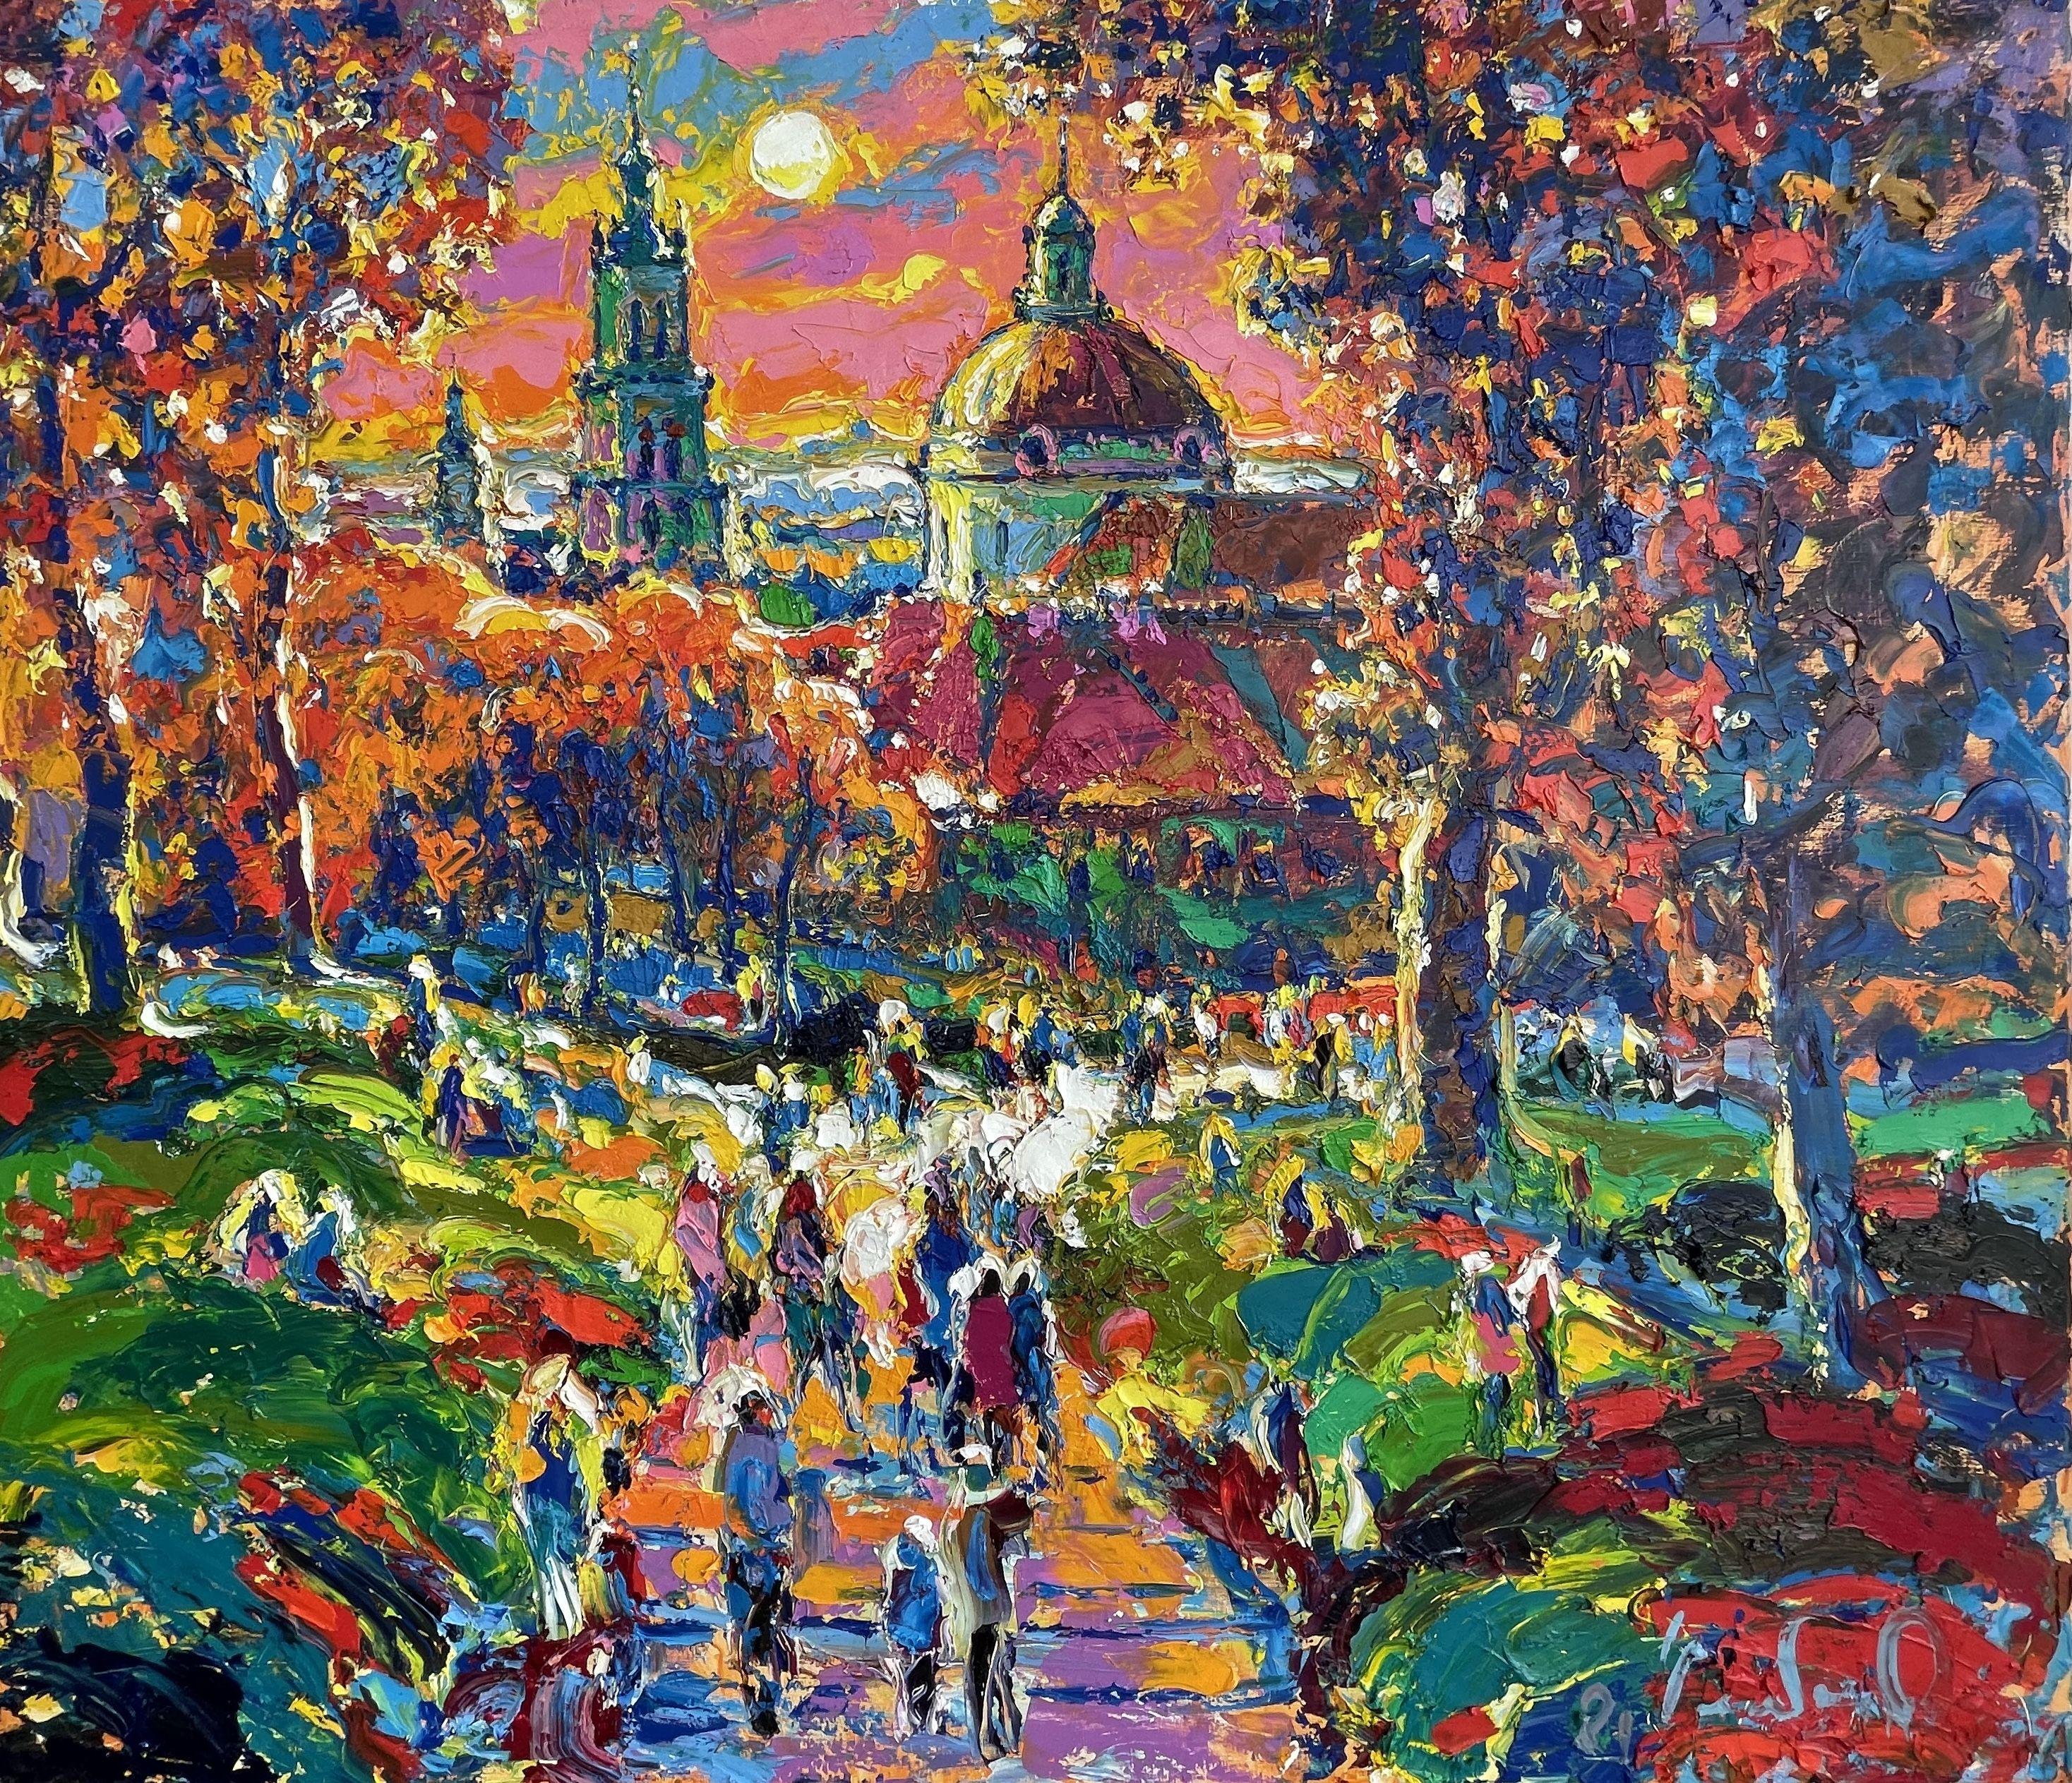 This work of art (Autumn Lviv) is a one-of-a-kind bright colorful canvas. I make really bright colors. I painted in the free style of the Impasto Impressionists.    Painted with high quality oil paints on artistic stretched canvas, this painting